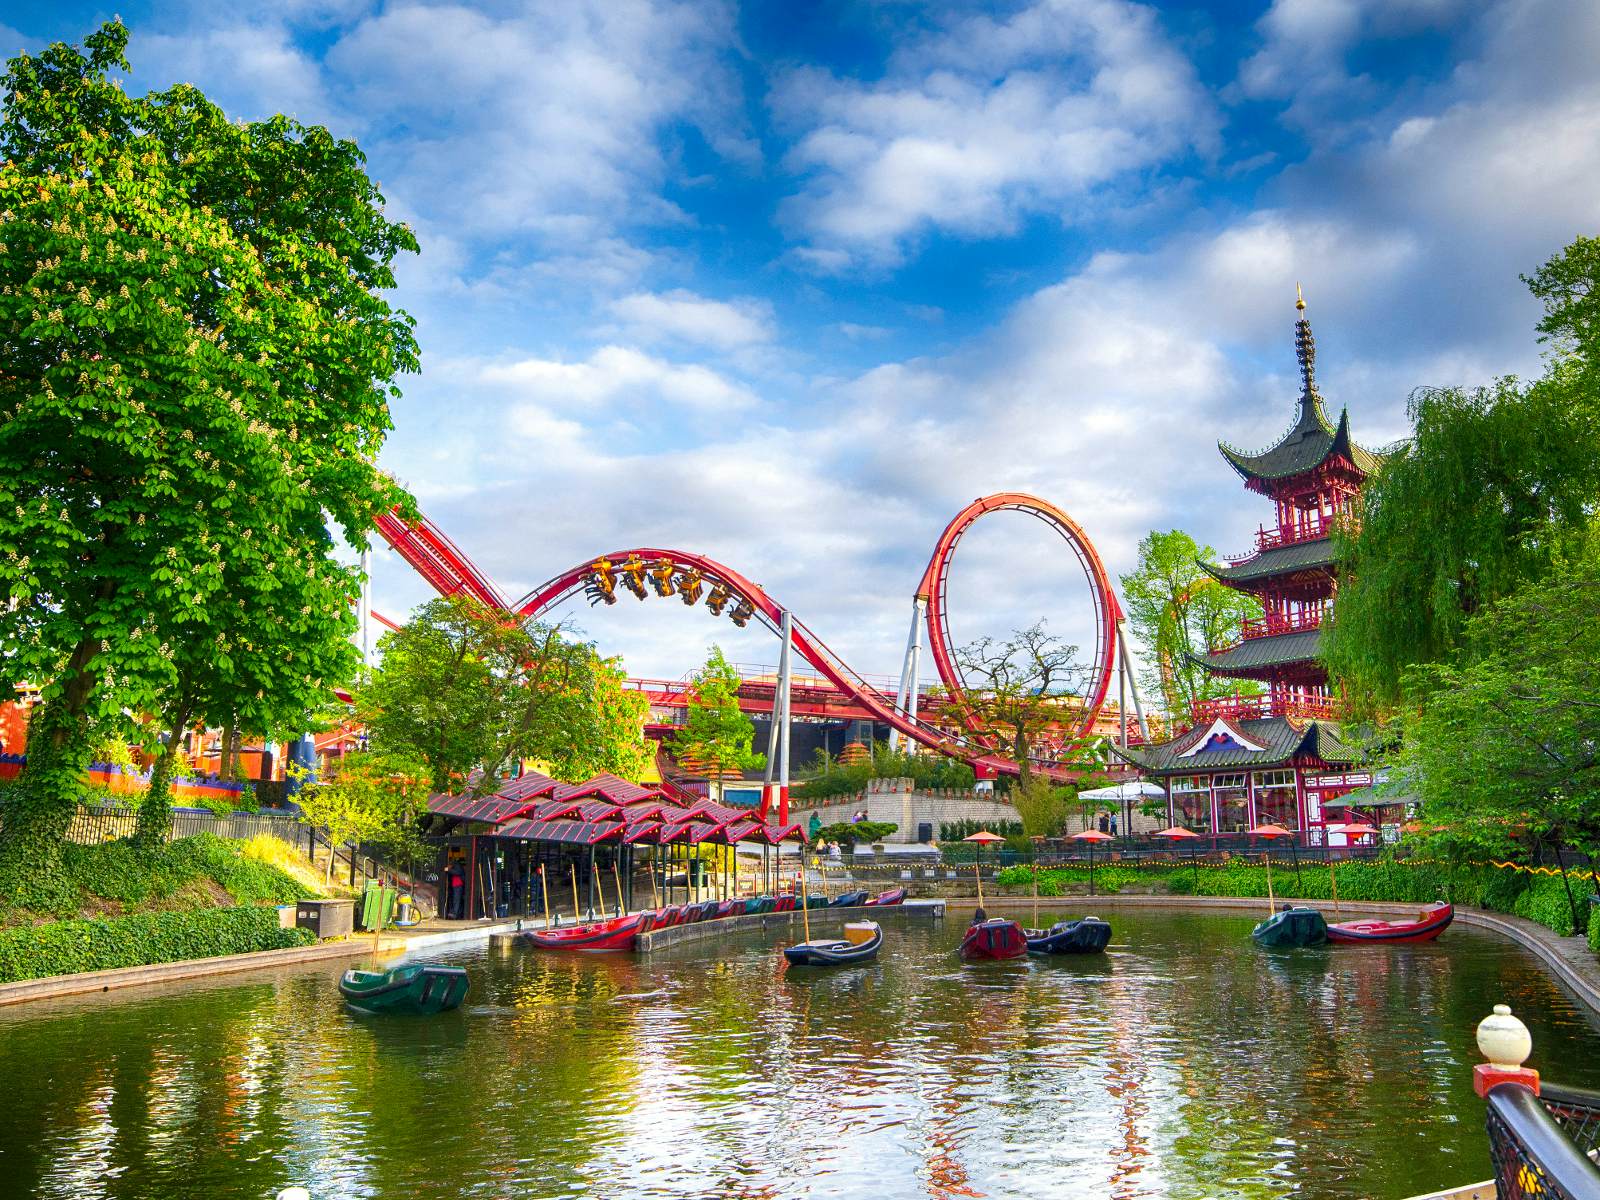 10 Alternative Theme Parks For Families Move Aside Mickey Images, Photos, Reviews